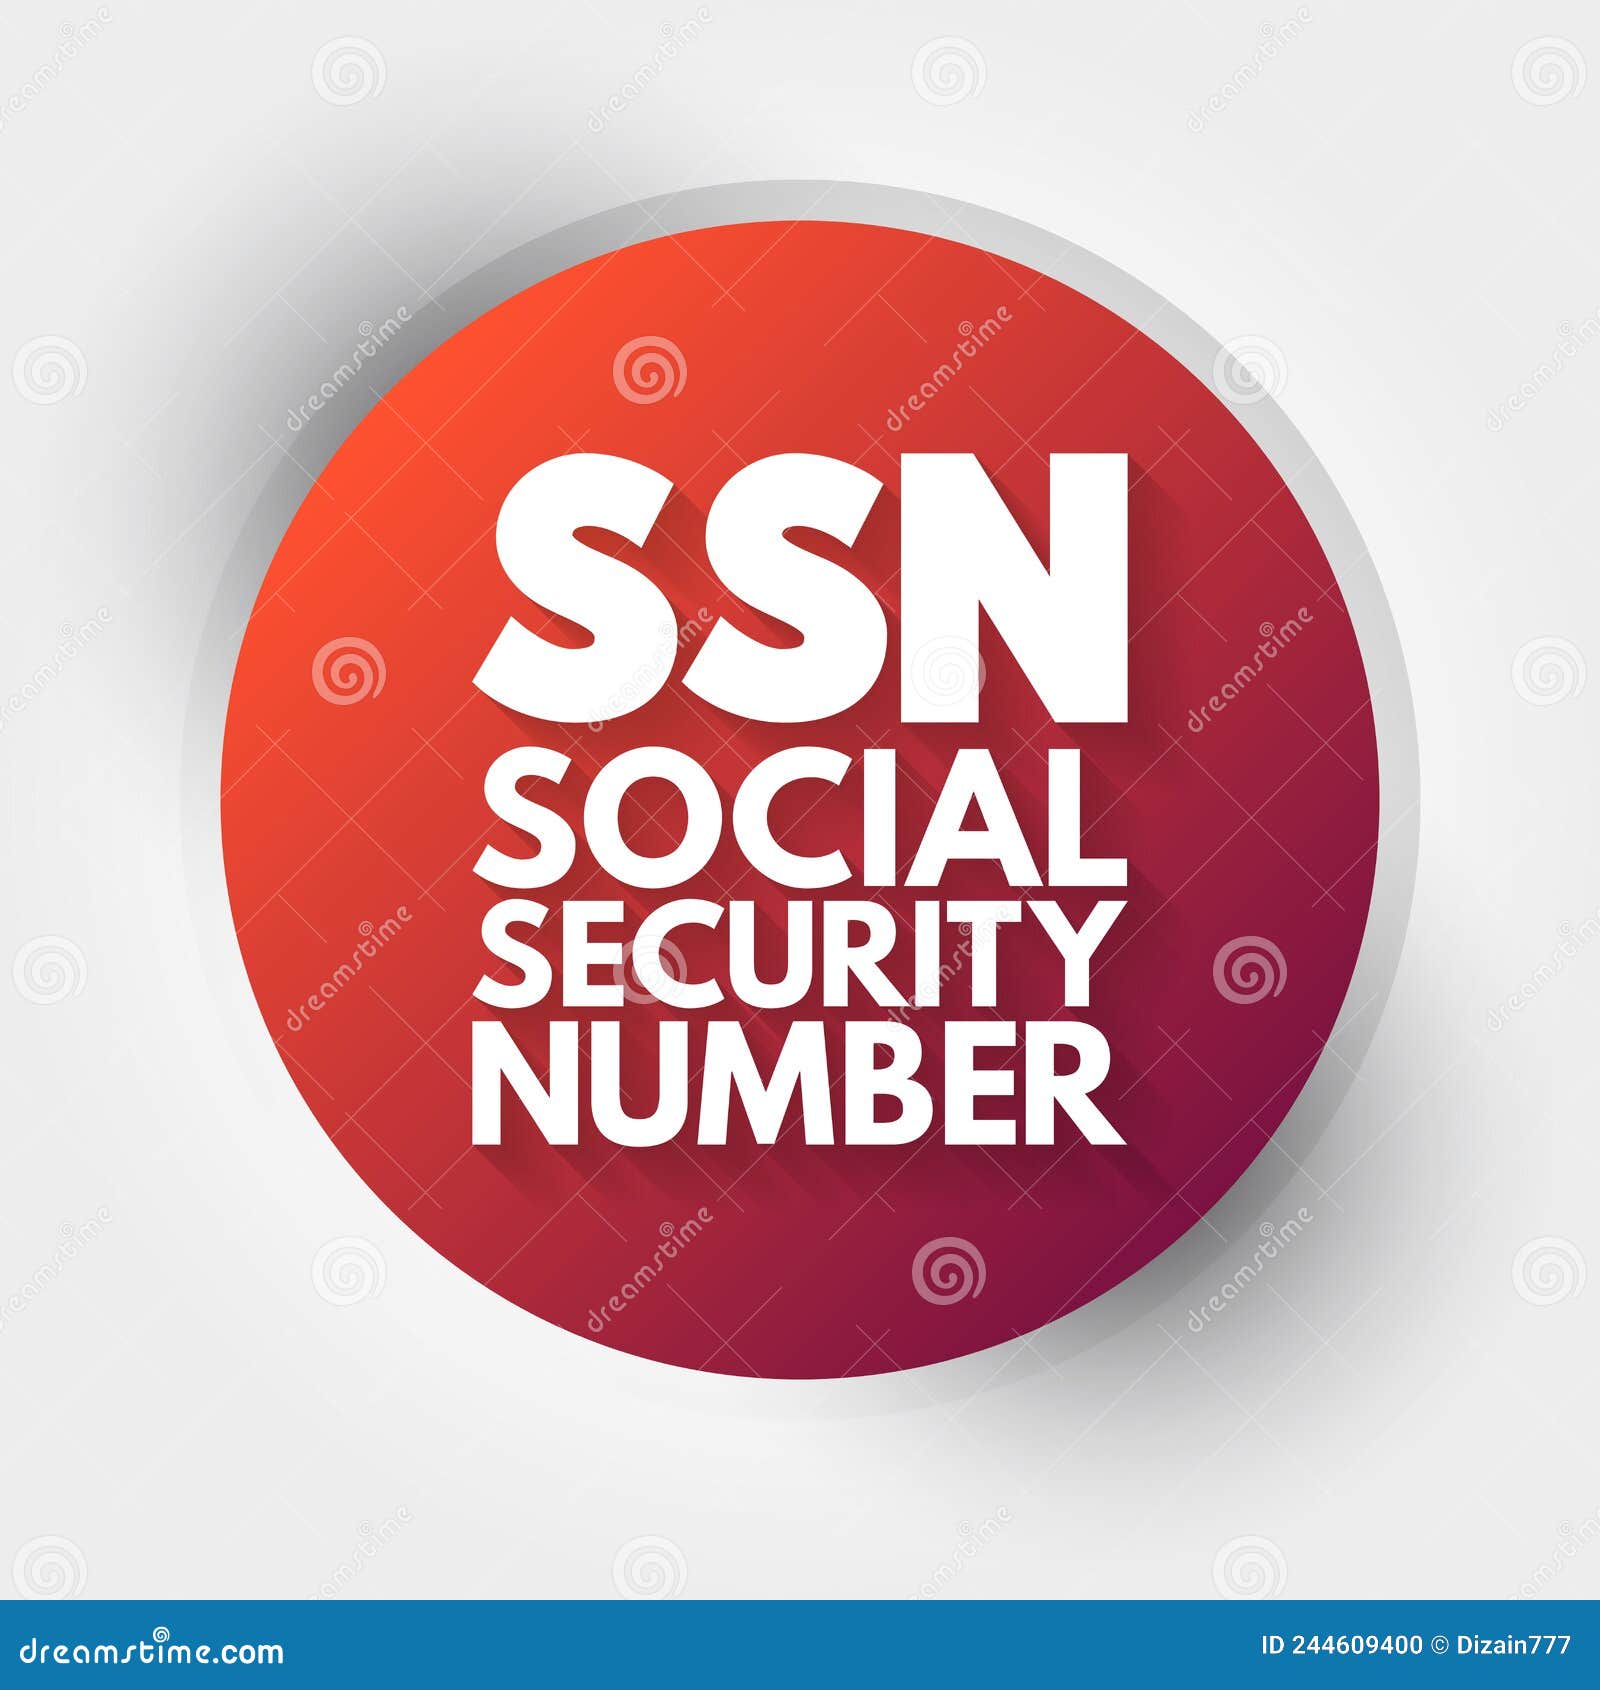 ssn - social security number acronym, concept background